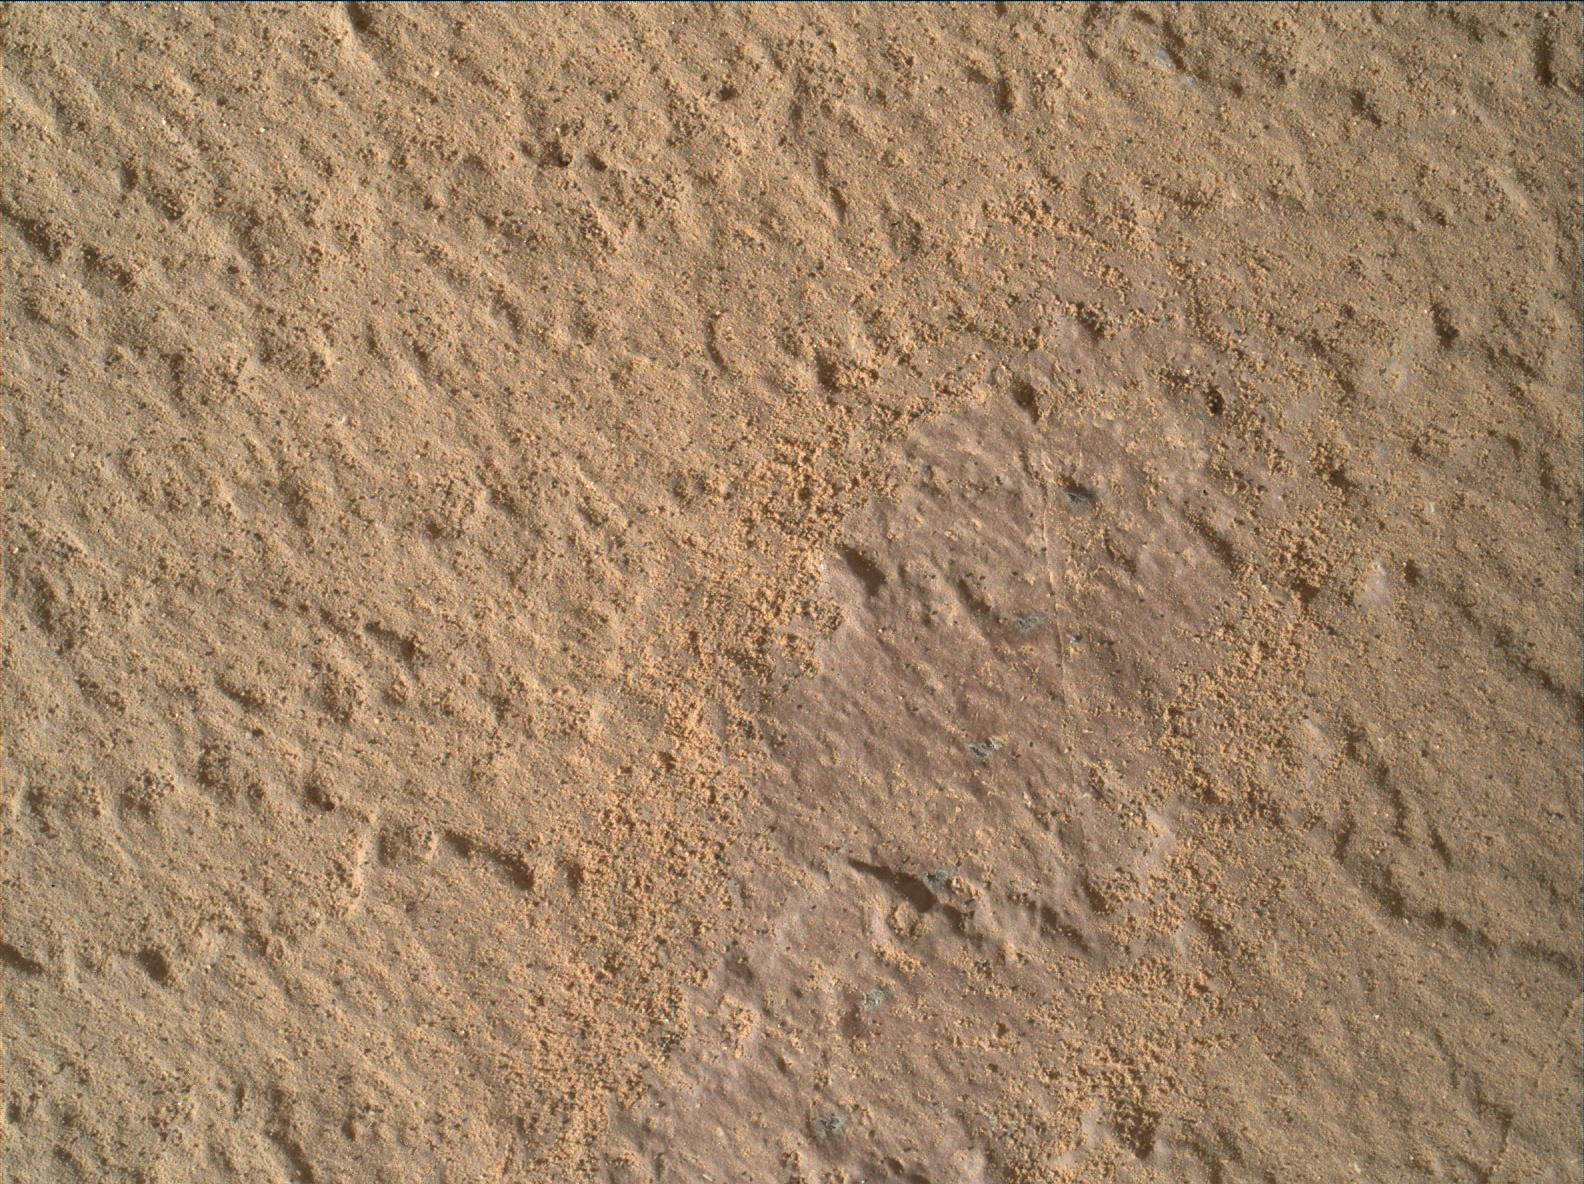 Nasa's Mars rover Curiosity acquired this image using its Mars Hand Lens Imager (MAHLI) on Sol 1417